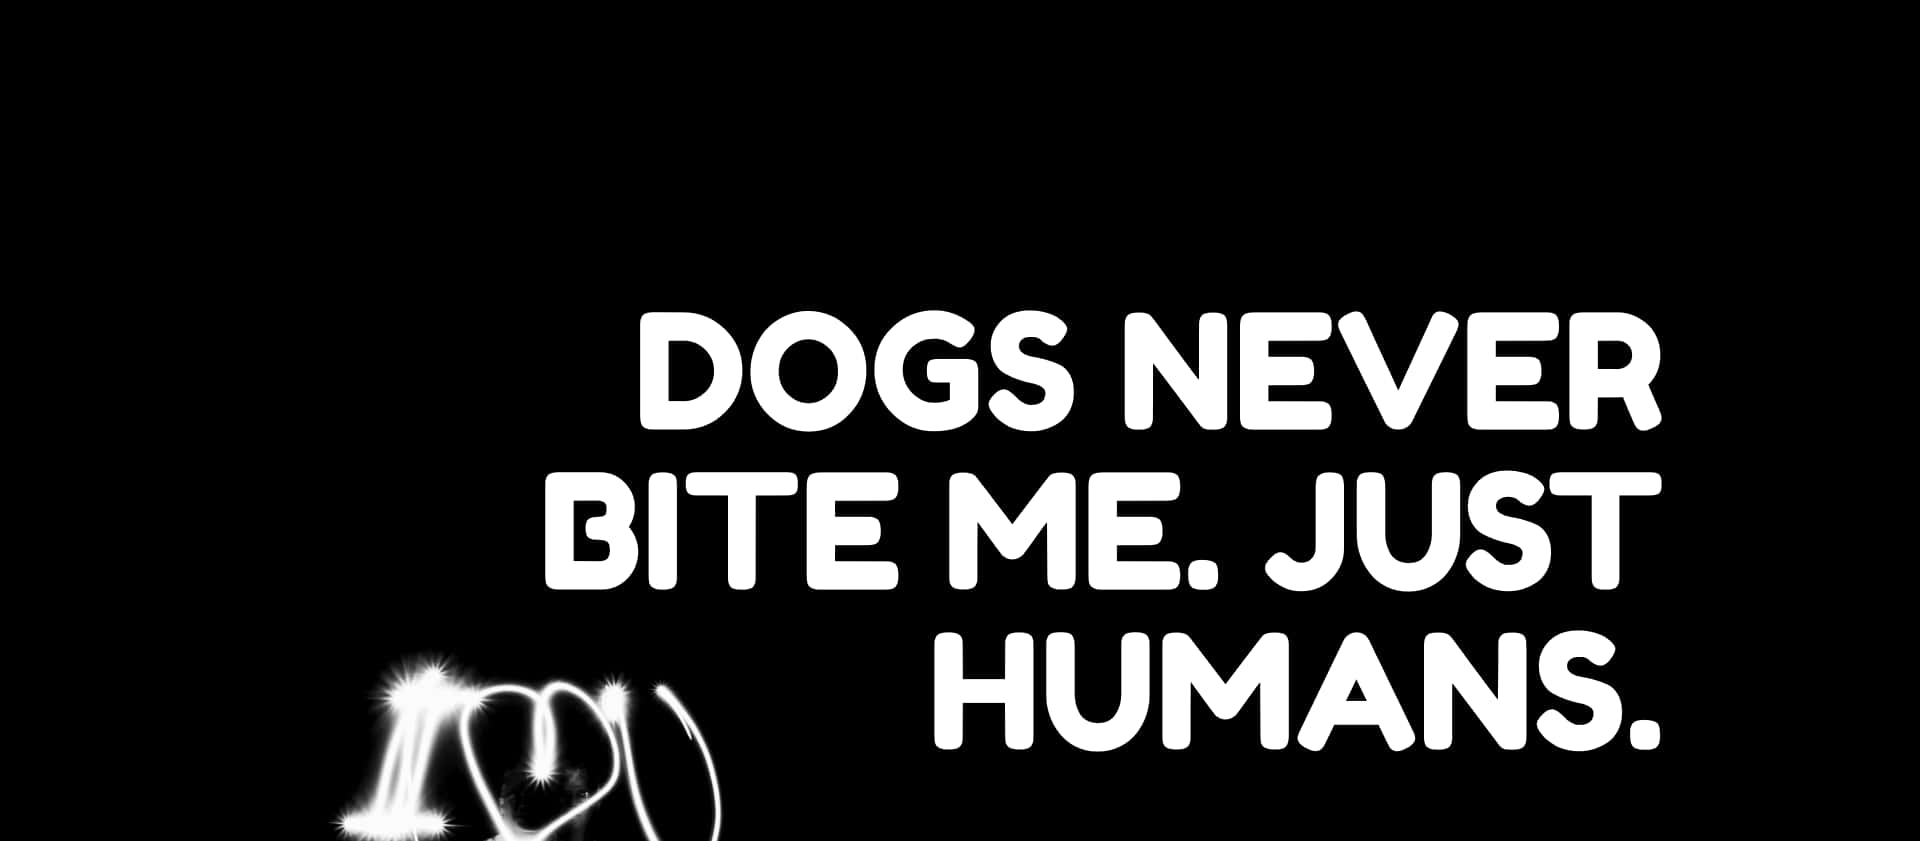 Dogs Never Bite Me Just Humans Wallpaper